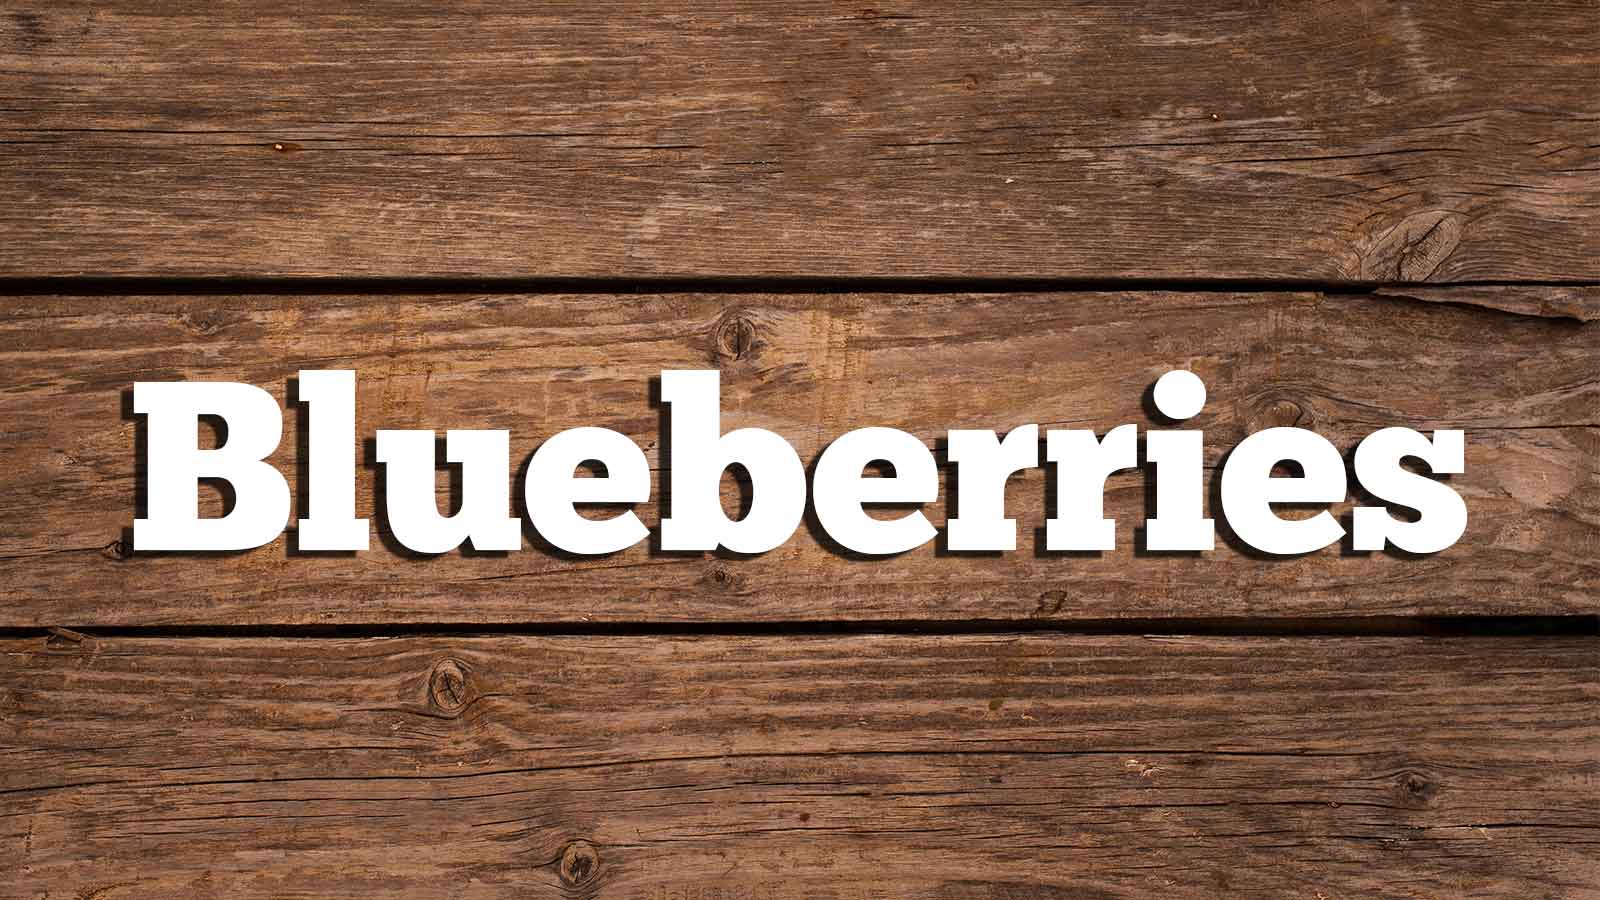 Text Blueberries